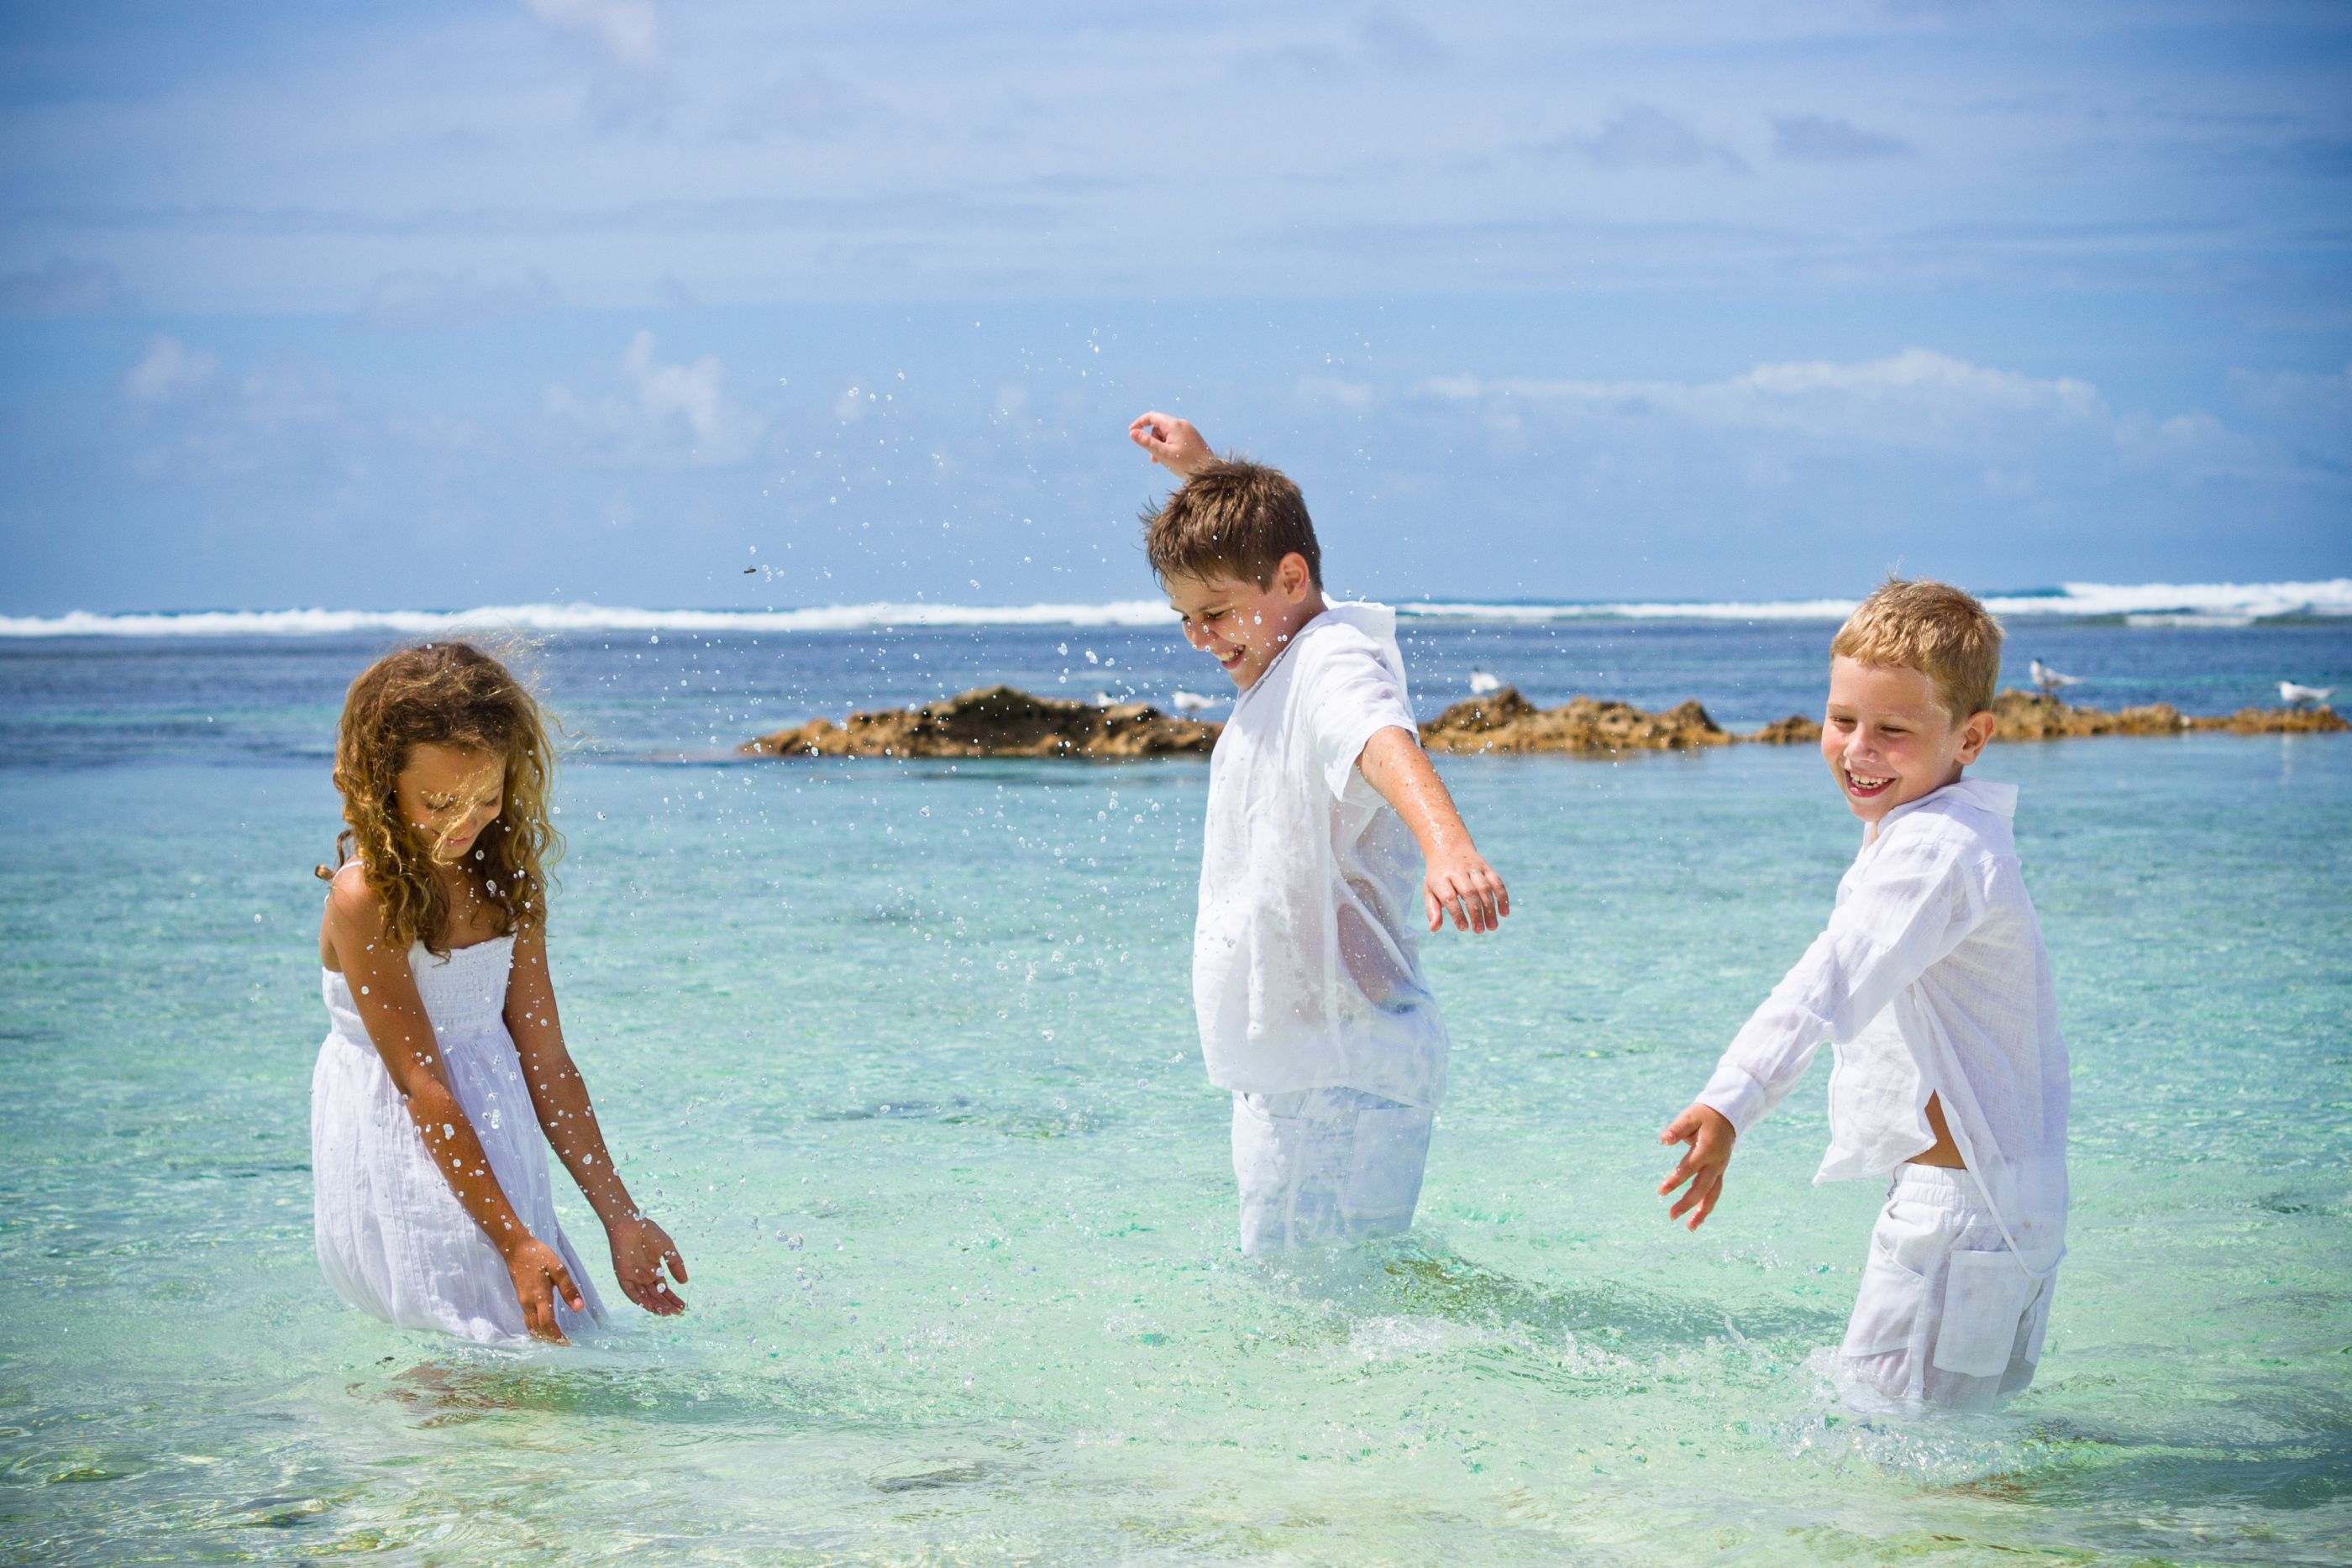 Children playing in the ocean at Denis Island, Seychelles